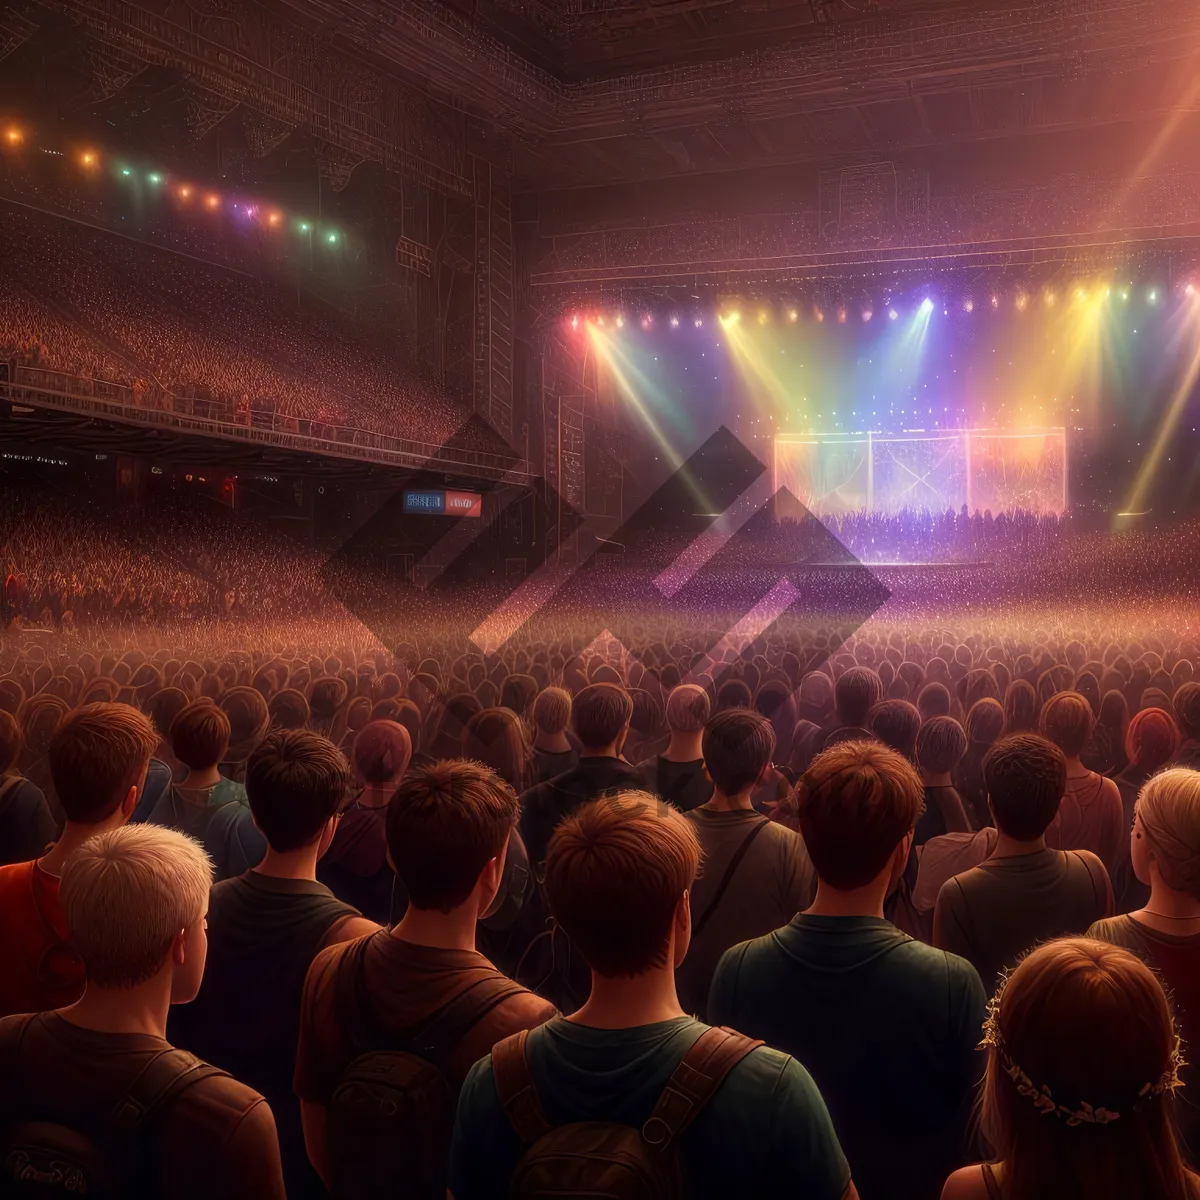 Picture of Nighttime Concert Crowd in Vibrant Theater Setting